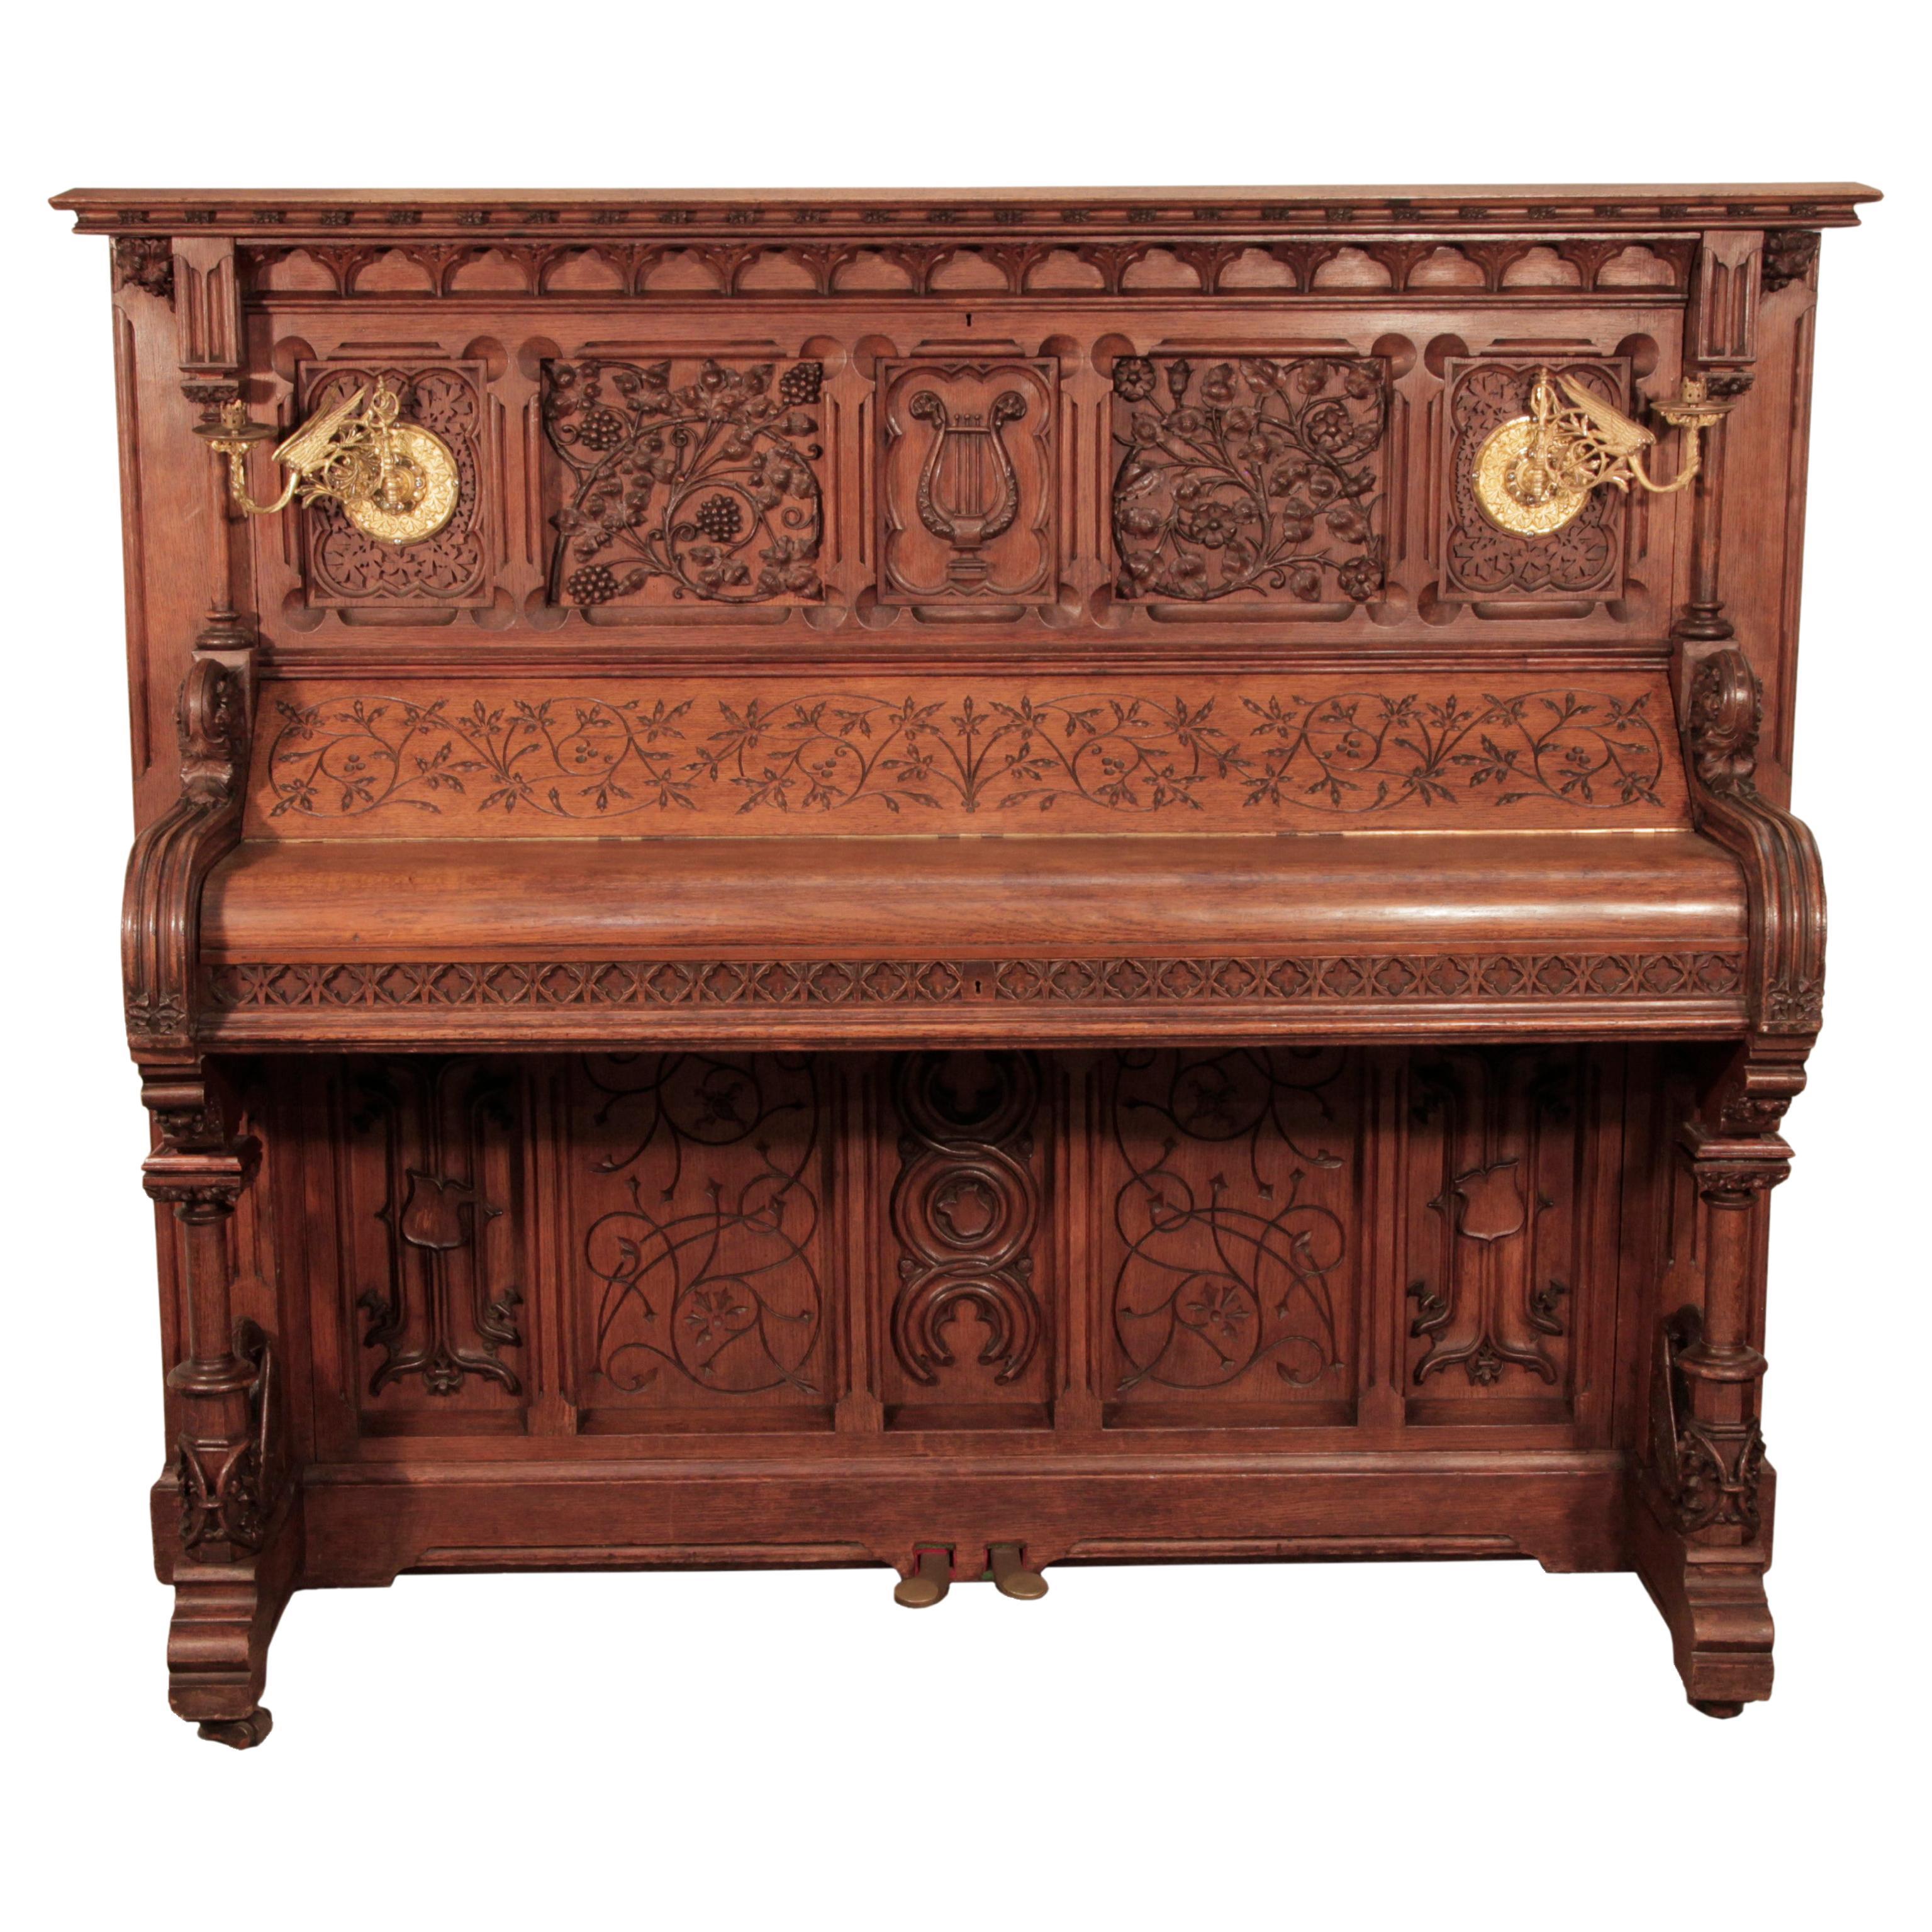 Renaissance Style, Gebruder Knake Upright Piano Carved Oak High Relief For Sale